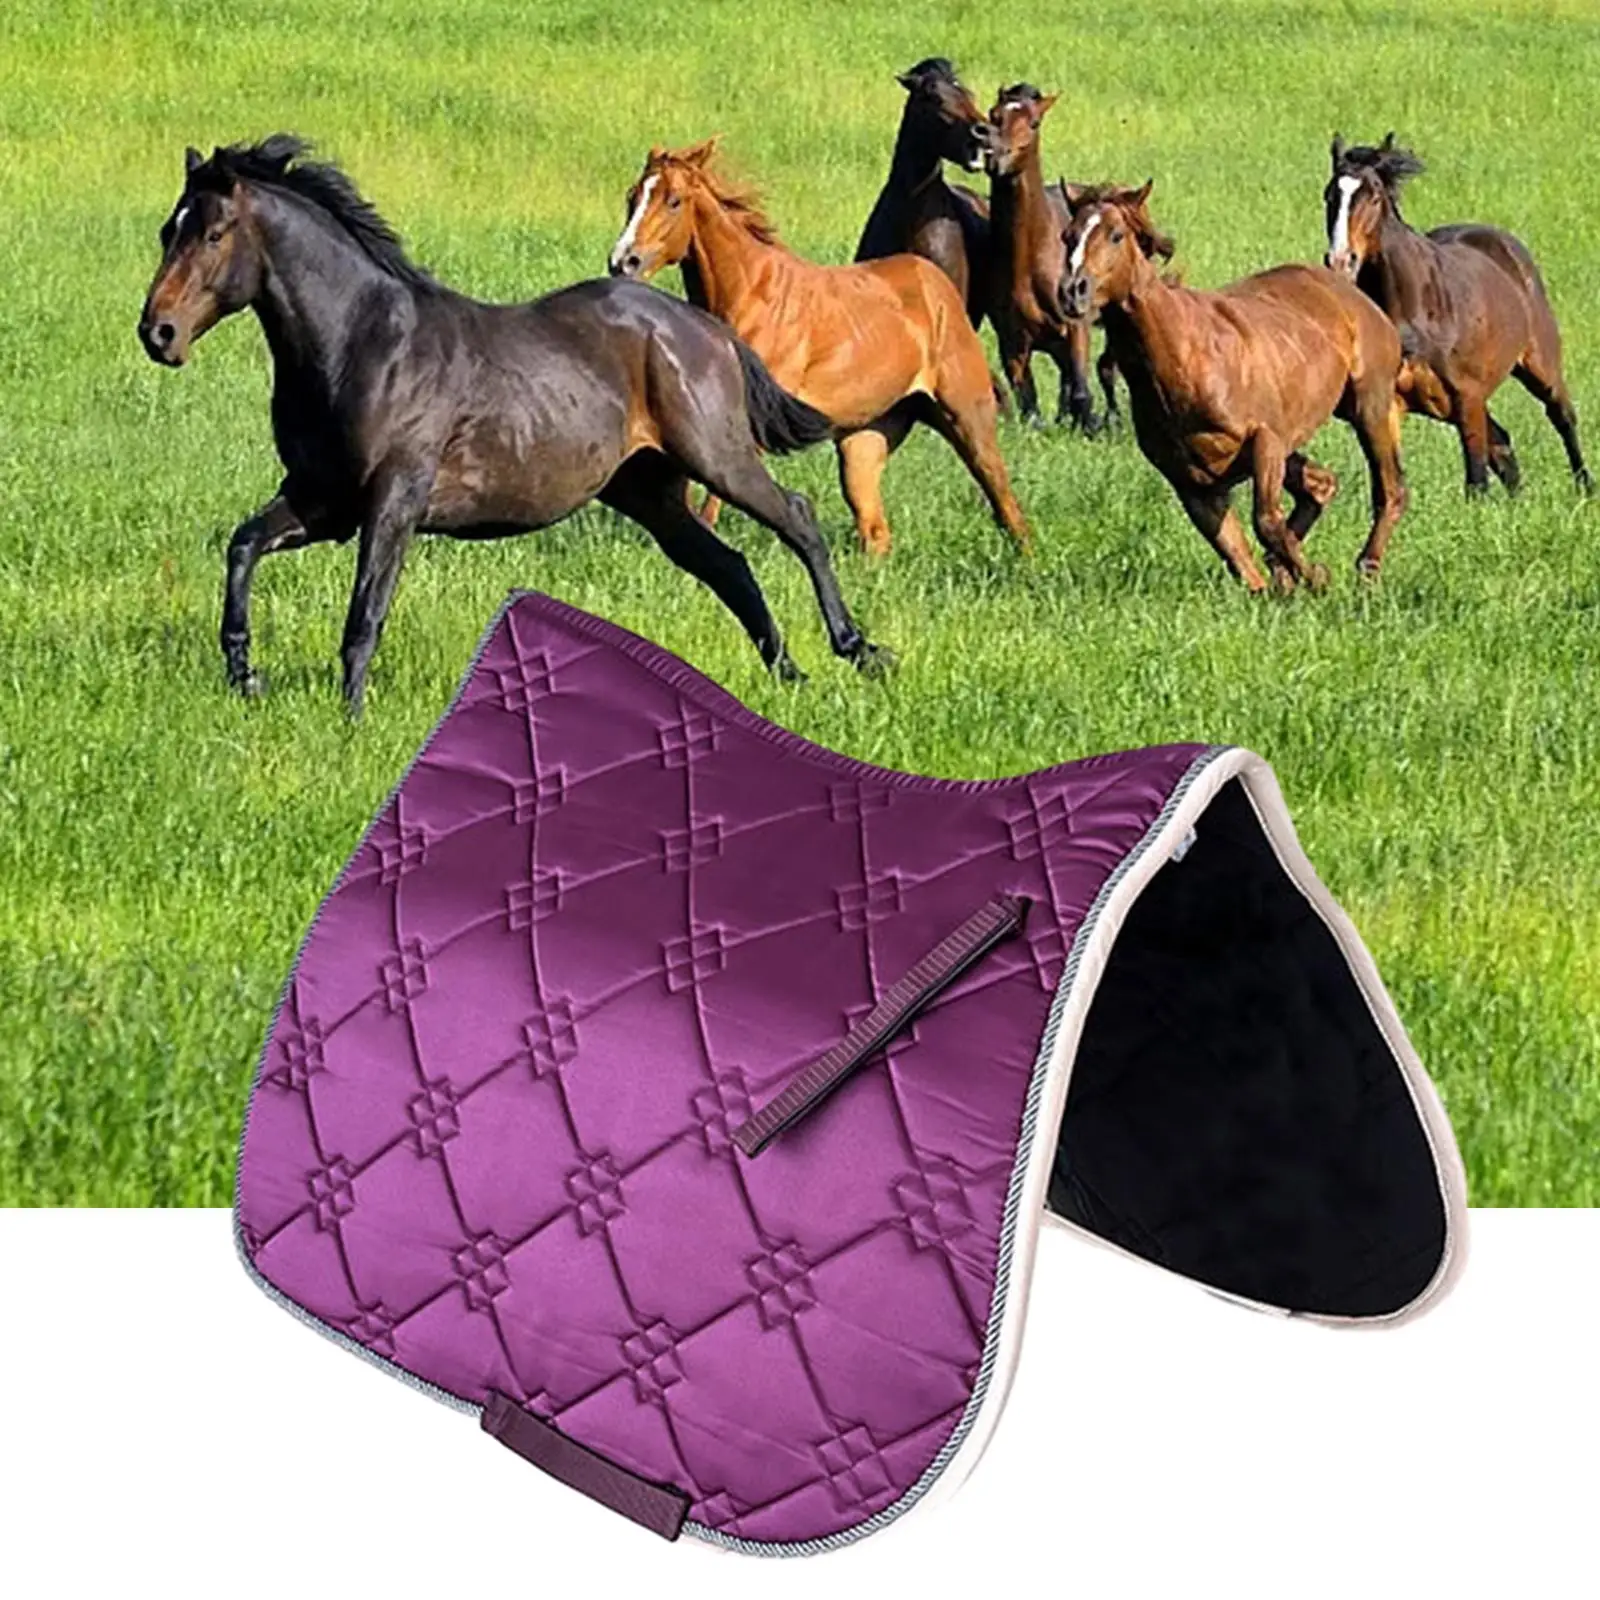 Saddle Pad for Horse Nonslip Soft Protective Thickening Padding Shock Absorbing Sports Equestrian Jumping Dressage Pad